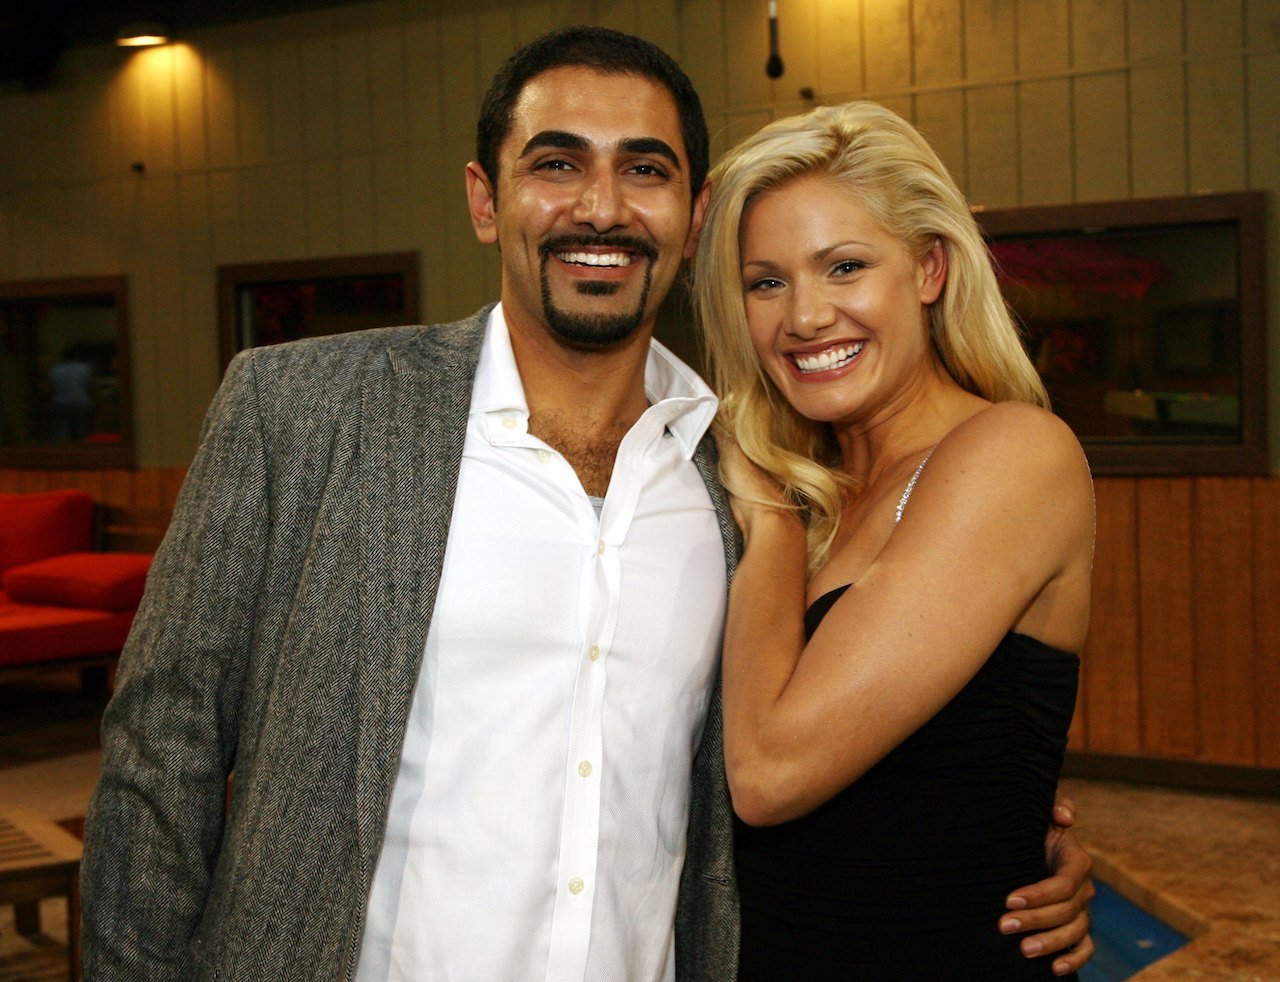 Kaysar Ridha (L) and Janelle Pierzina pose together closely of 'Big Brother'.